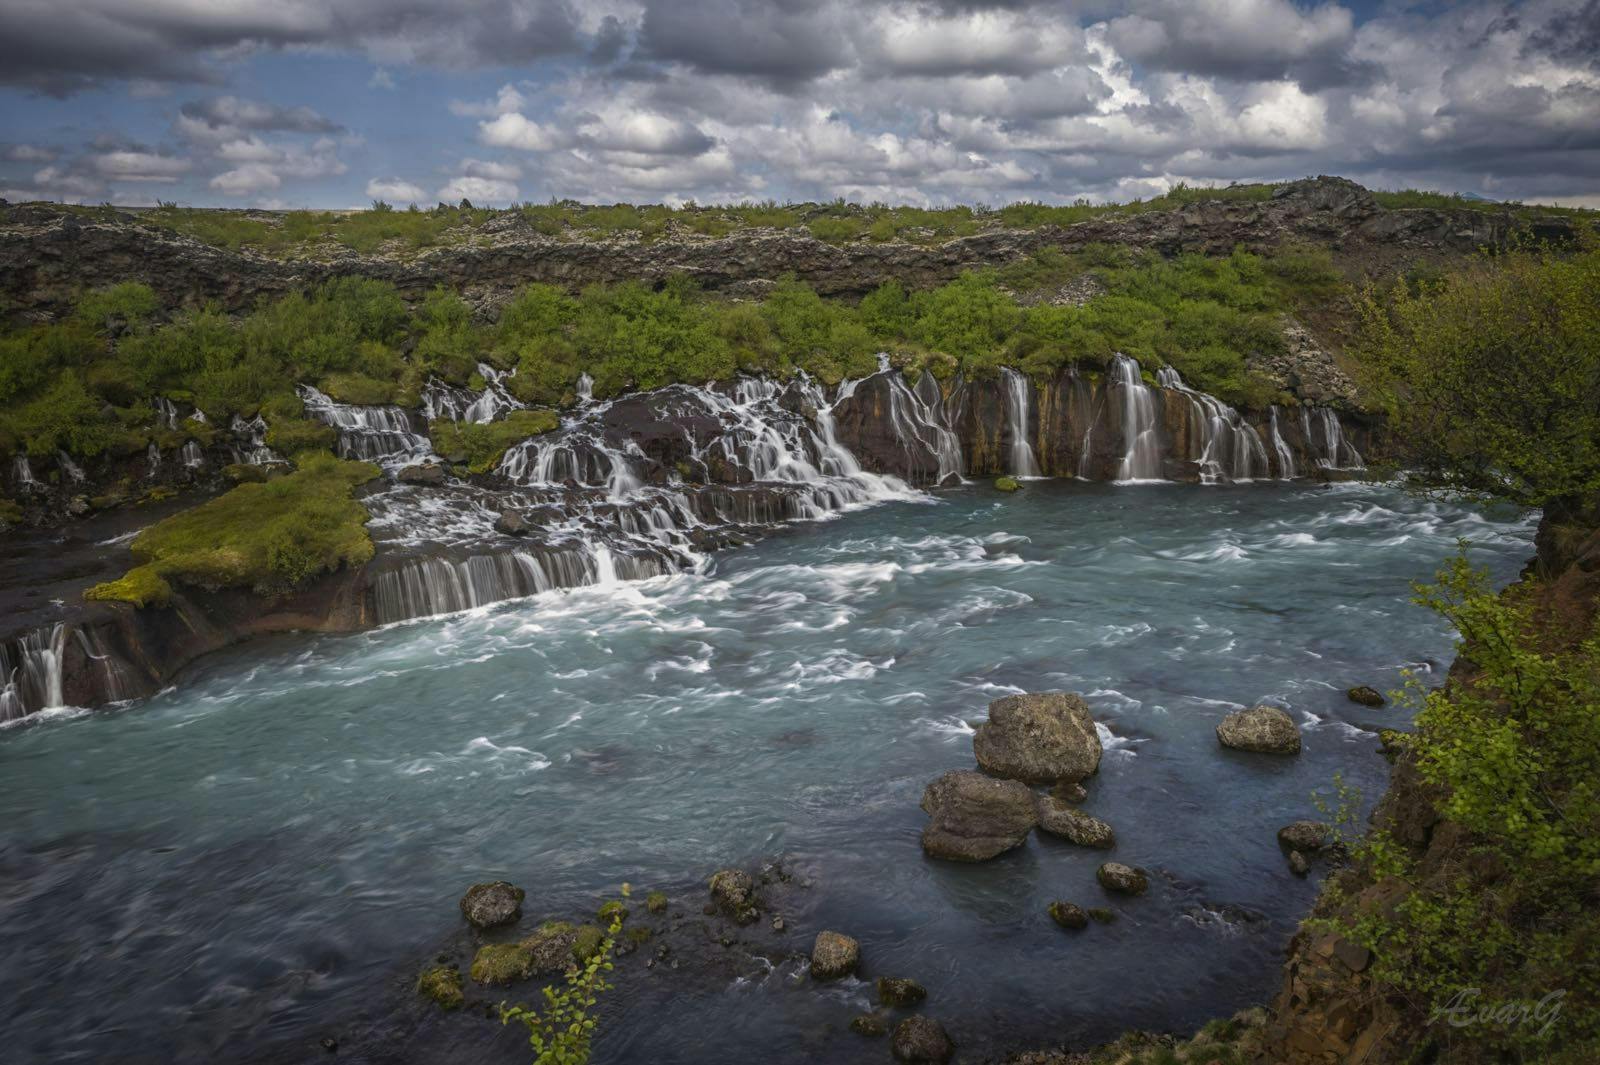 Hraunfossar waterfall streams out of a wide lava field in east Iceland in many serene rivulets.